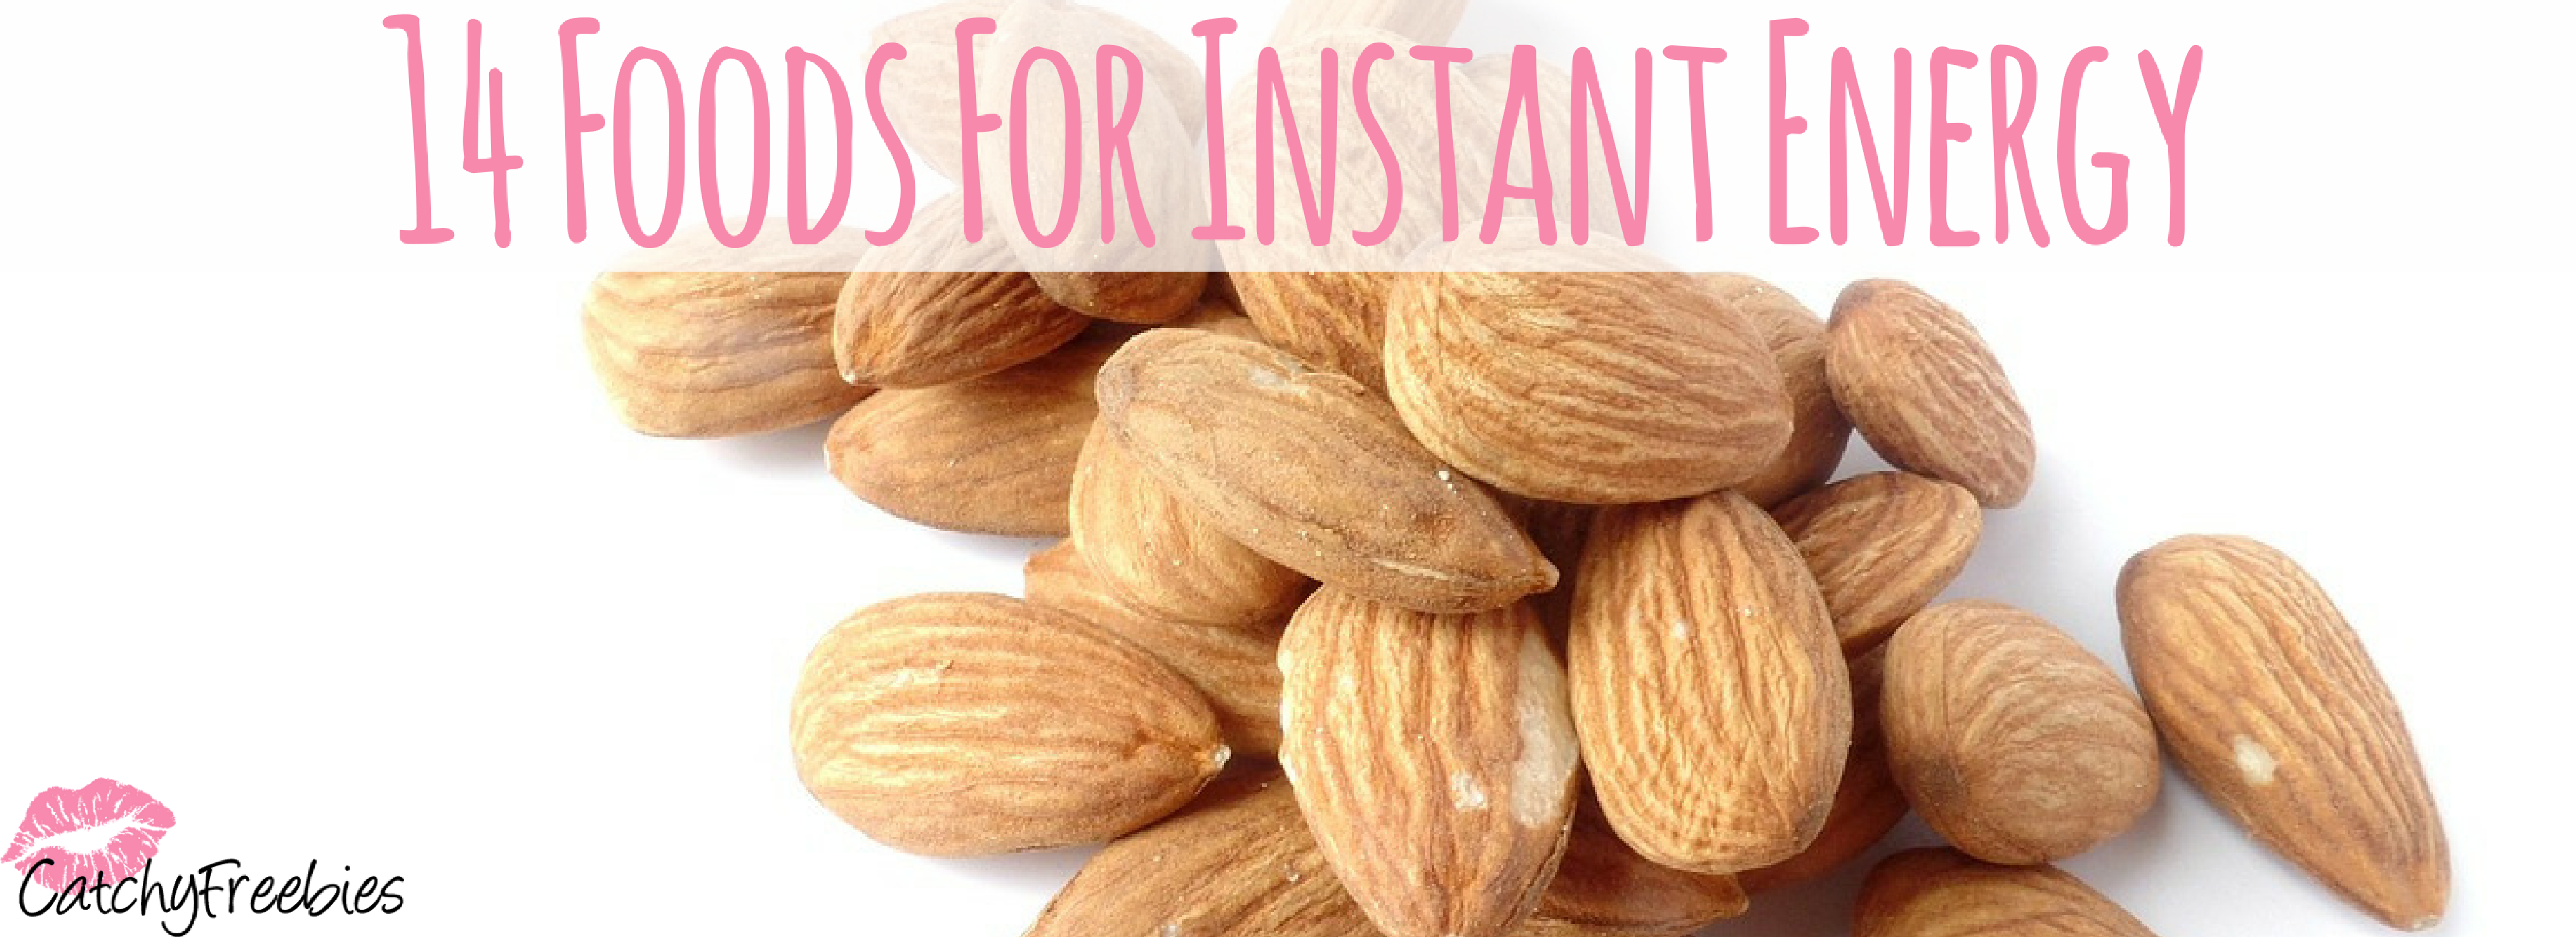 14 Foods For Instant Energy